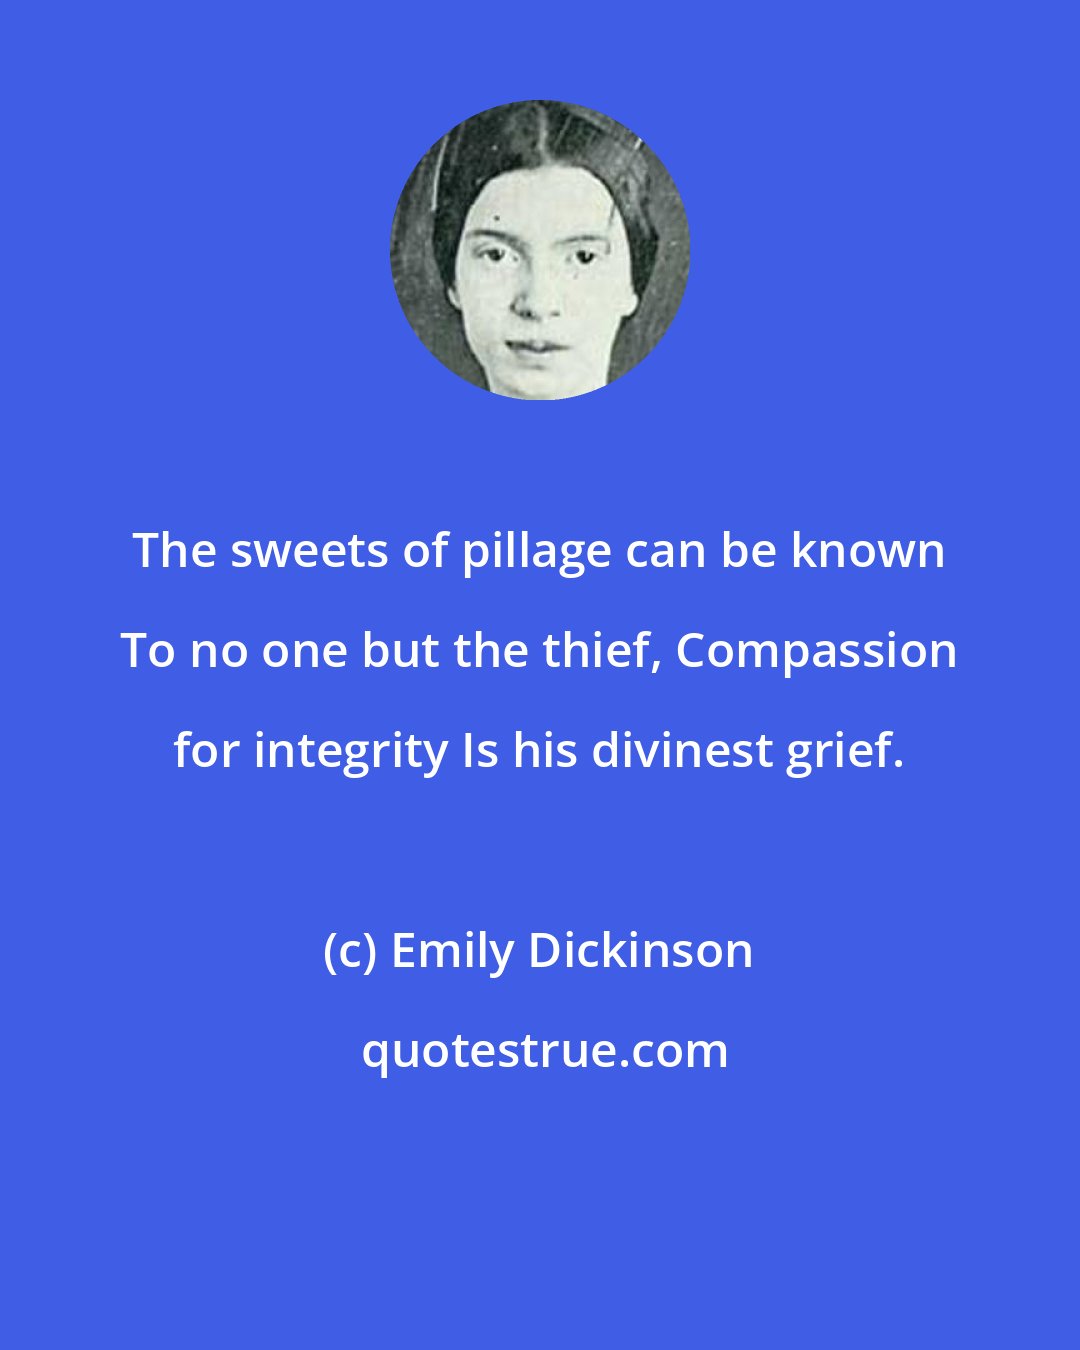 Emily Dickinson: The sweets of pillage can be known To no one but the thief, Compassion for integrity Is his divinest grief.